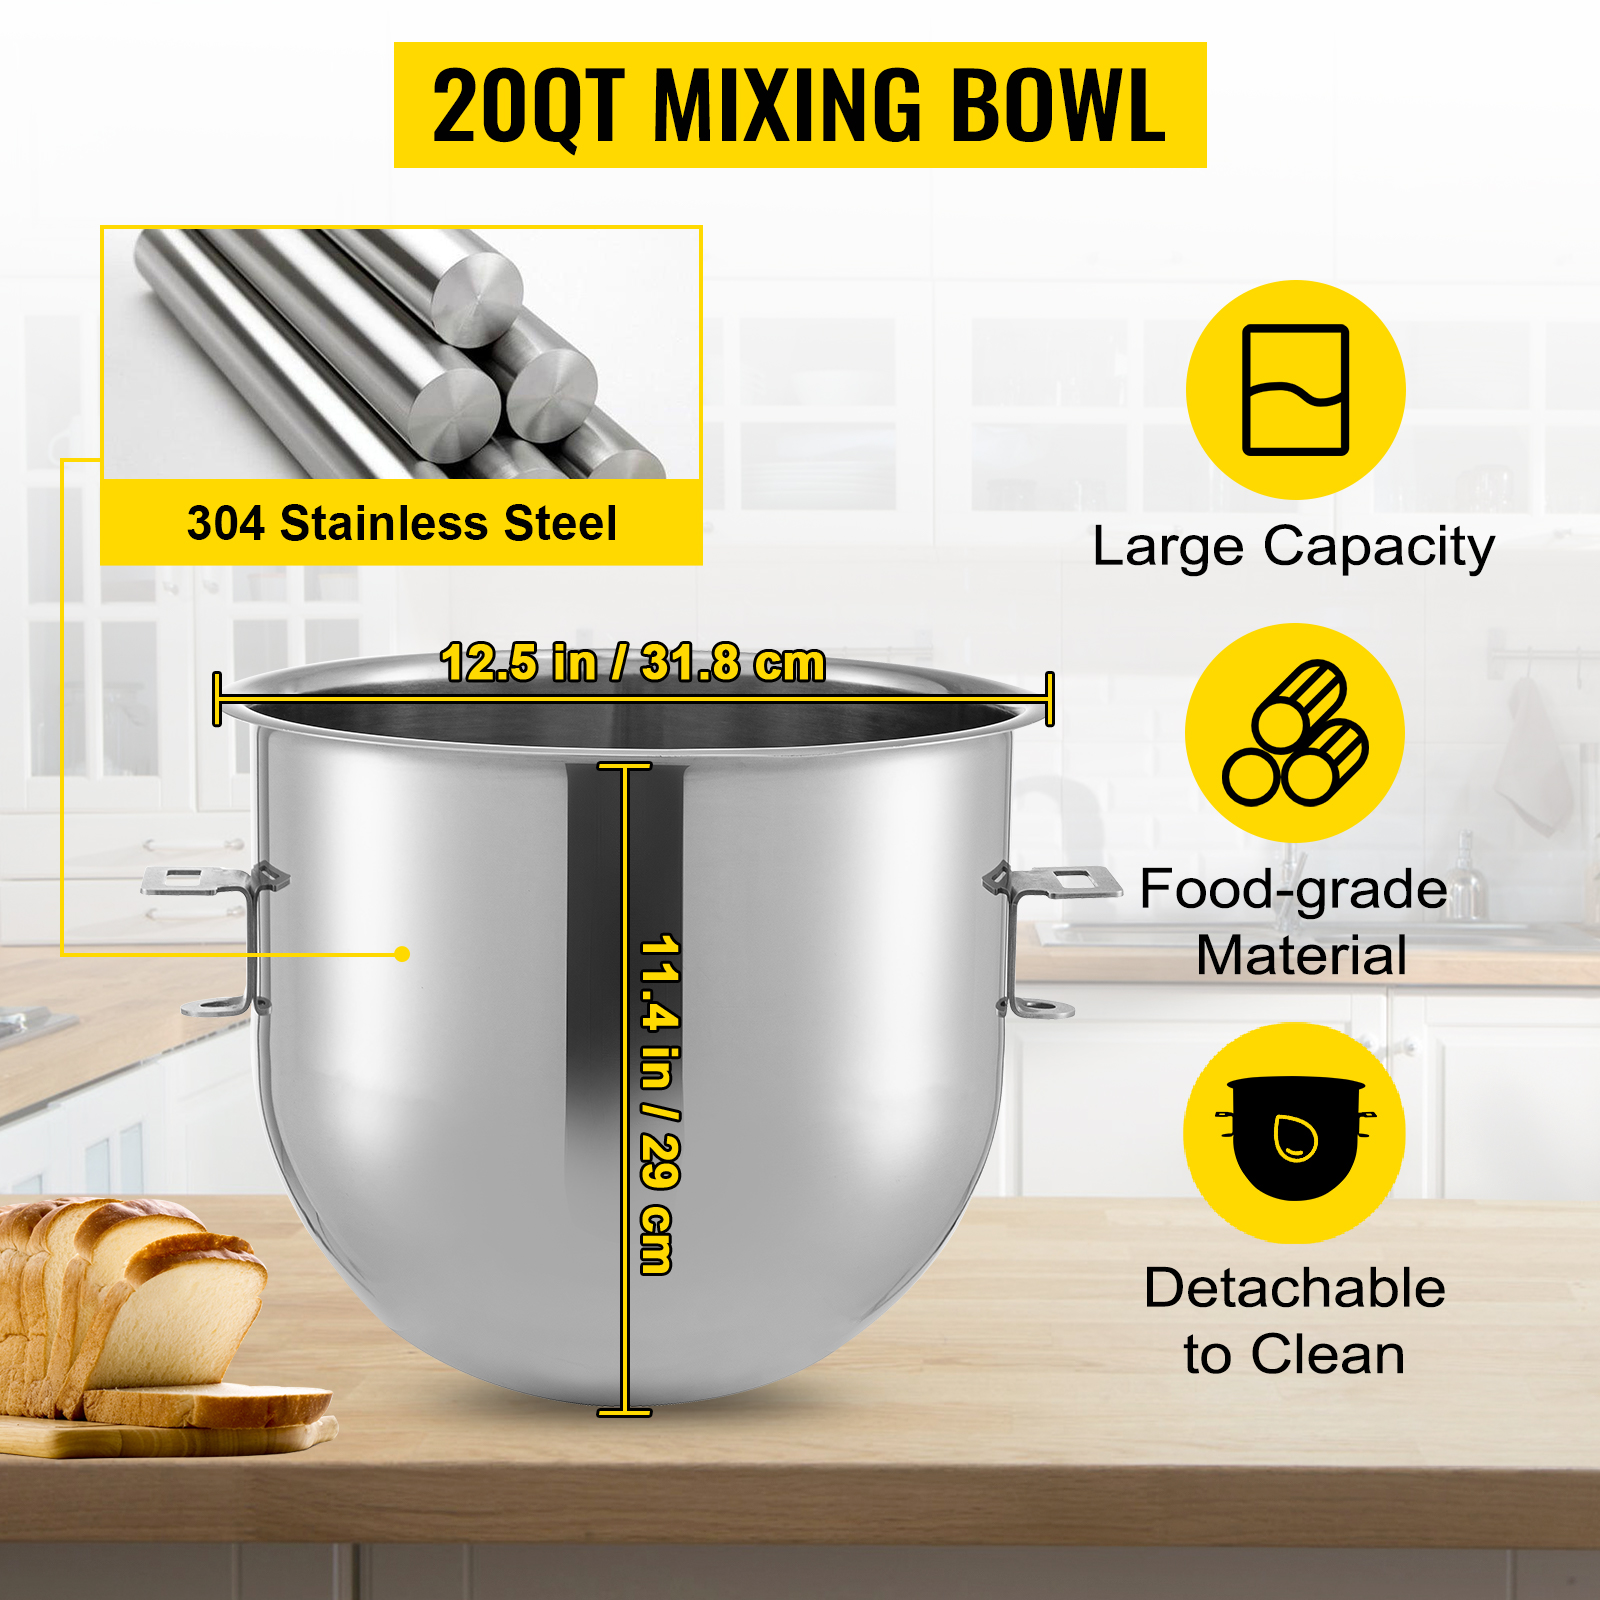 VEVOR Commercial Stand Mixer, 20Qt Stainless Steel Bowl, 1100W 2